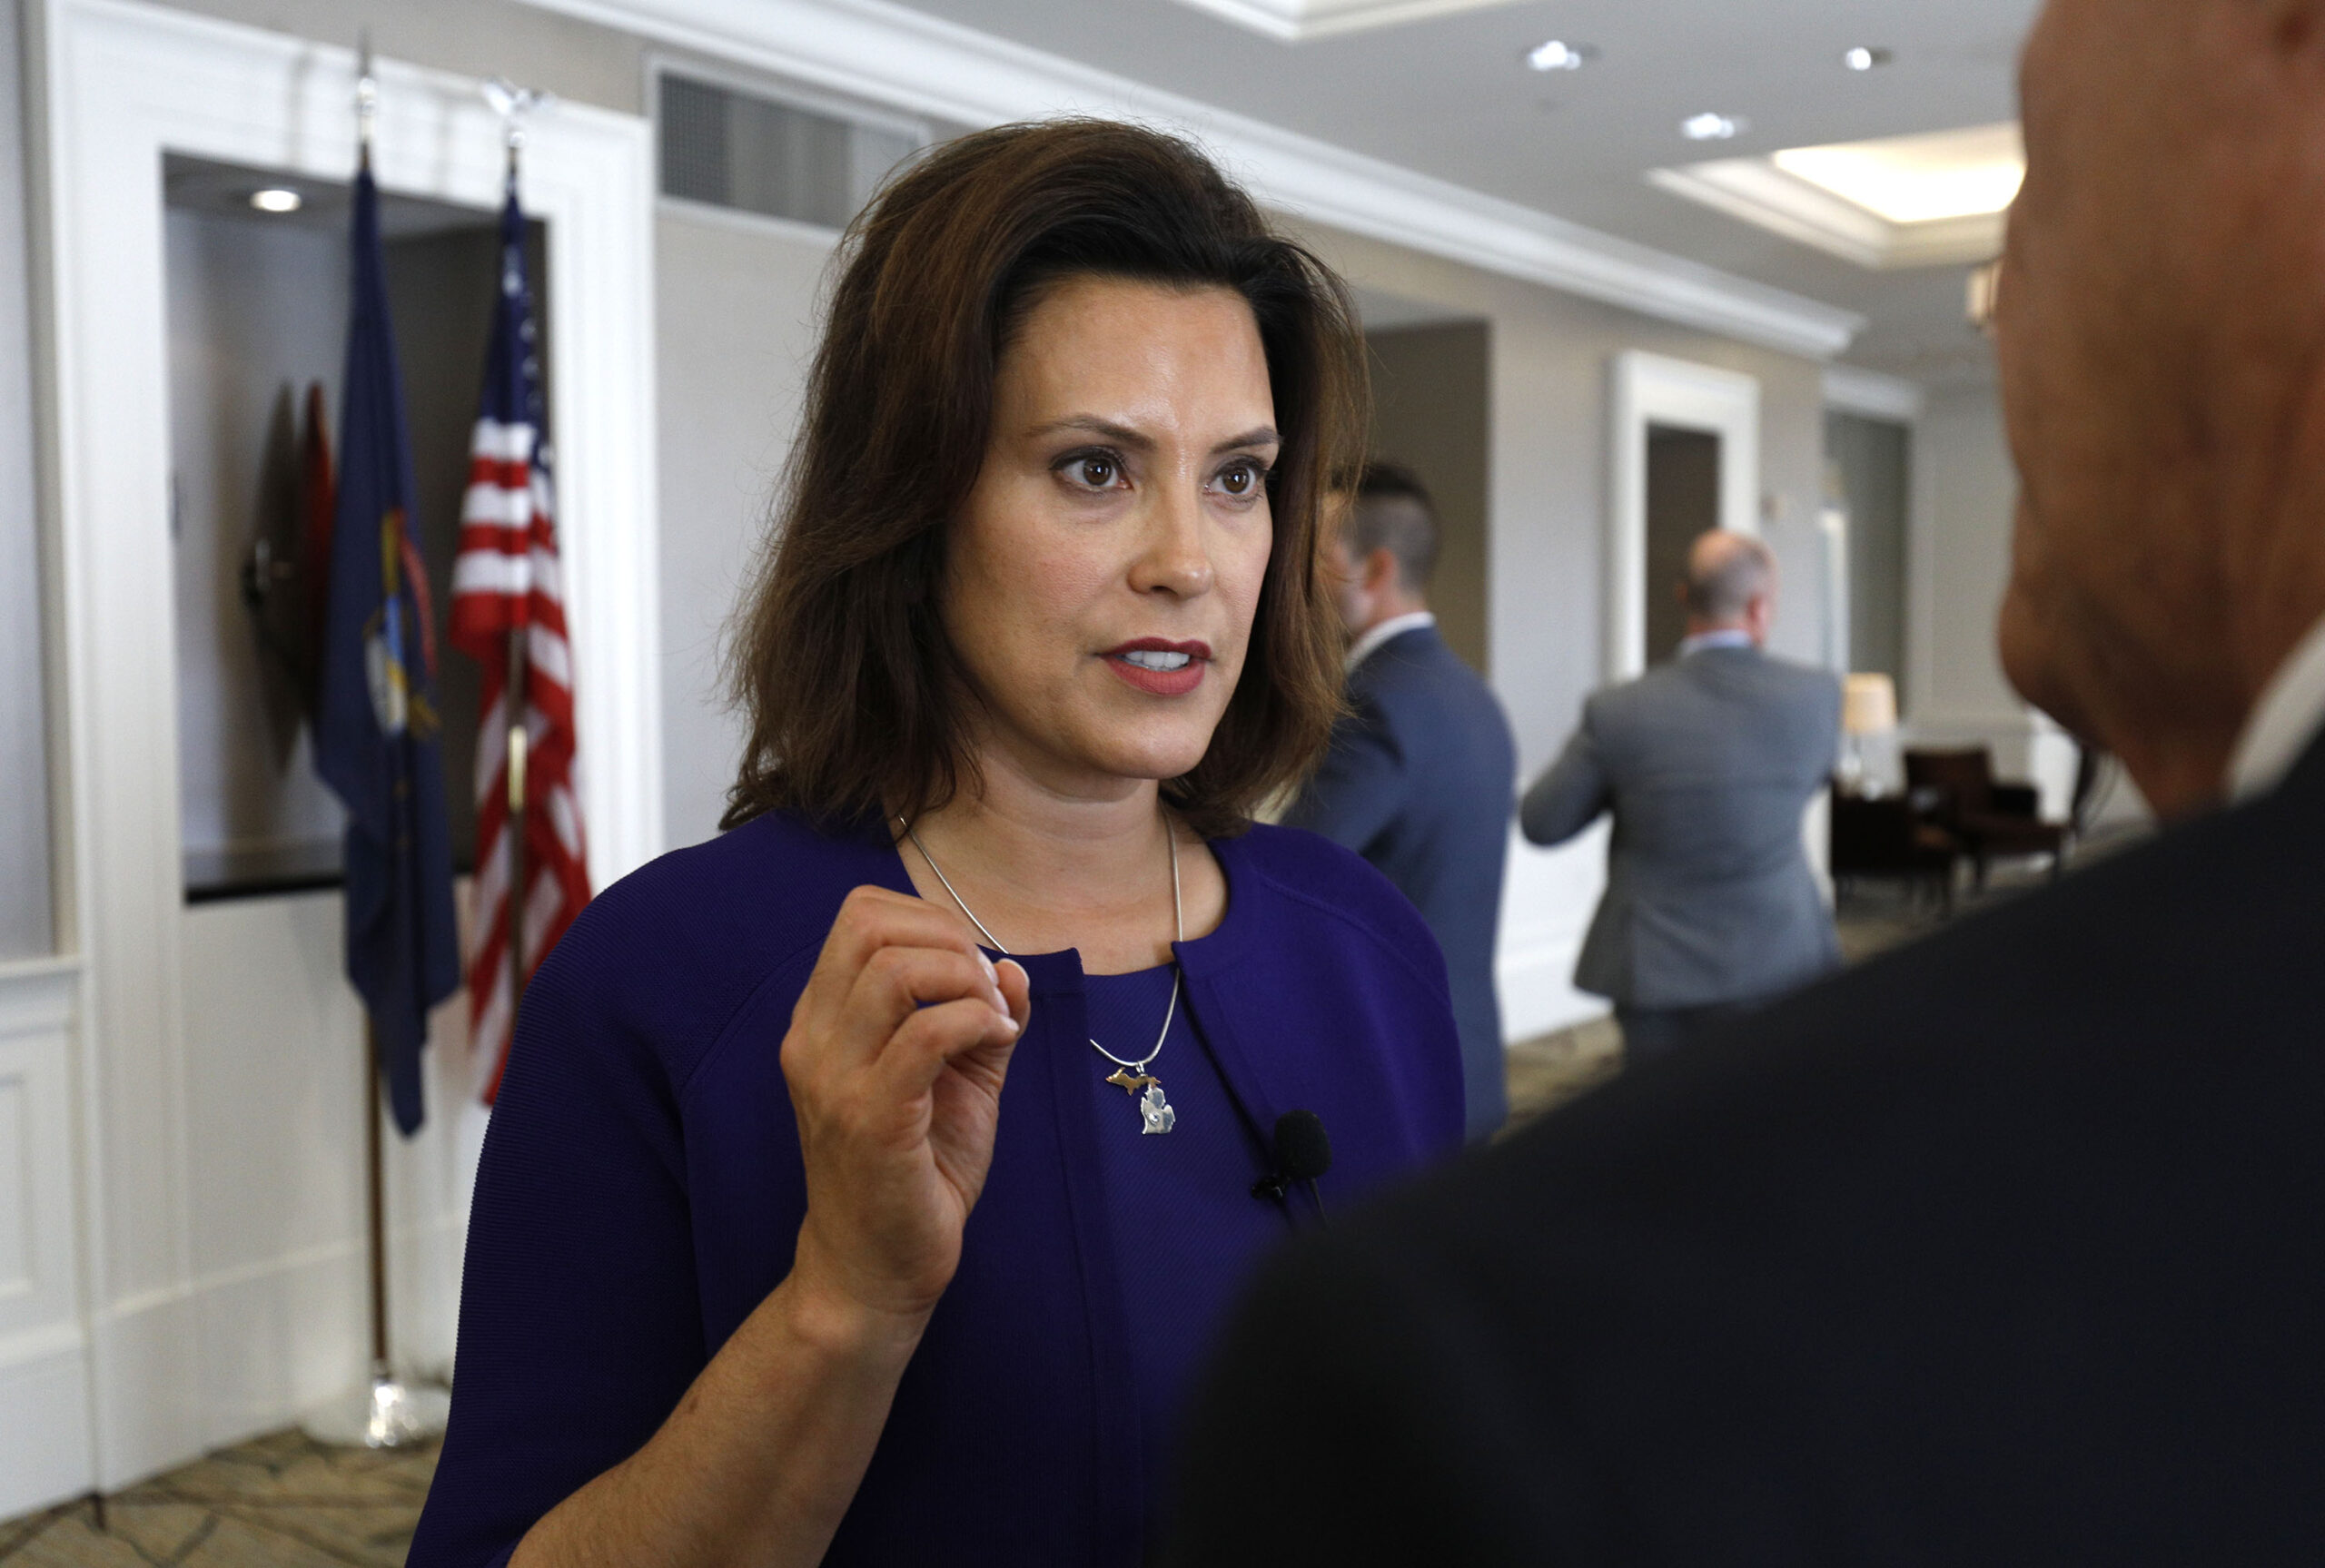 Whitmer removes Funding From State’s Budget In Line With Evil Left’s Agenda